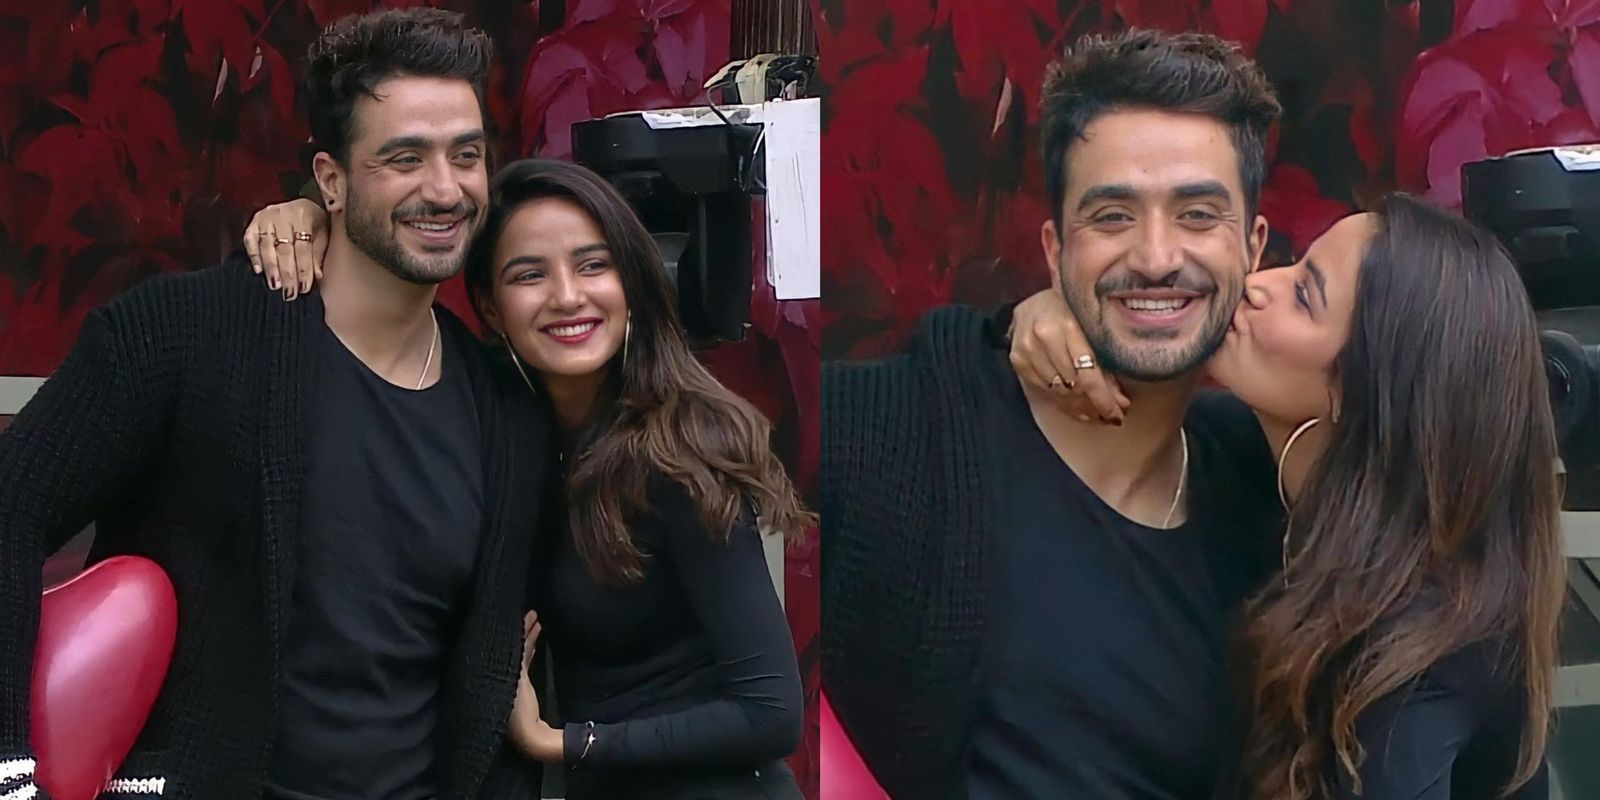 Bigg Boss 14: After Confessing His Love, Aly Goni Sends His Ring To Jasmin Bhasin; Watch